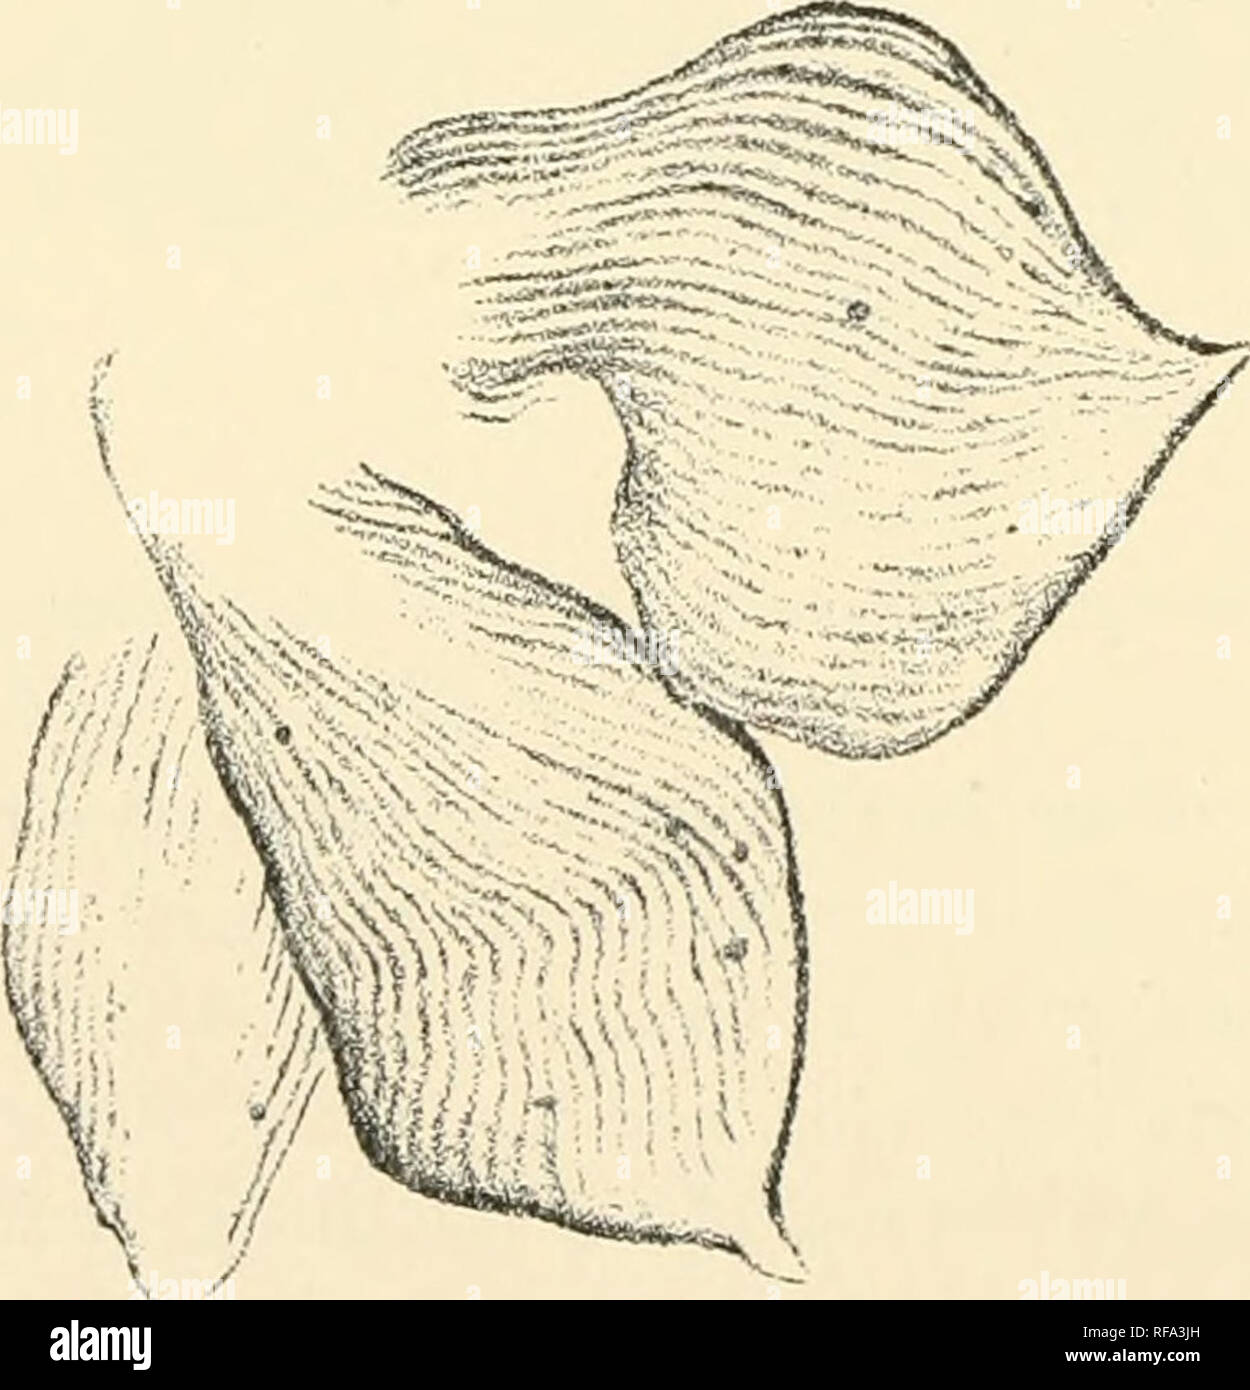 . Catalogue of the fossil plants of the Glossopteris flora in the Department of geology. Paleobotany -- Carboniferous; Paleobotany -- Catalogs and collections; Plants, Fossil -- Catalogs and collections. Fig. 13.—Sporangium-like organs of Glossoptcris Browniana, Brong. V. 7202 and V. 7211. x 35. a number of considerations there is little doubt that they were of the nature of spores, and the sacs themselves sporangia.. Fig. 14.-—Sporangium-like organs of Glossoptcris Browniana, Brong., which have dehisced, viewed from the inner surface. 39,149. x 30. There can hardly be any hesitation in attrib Stock Photo